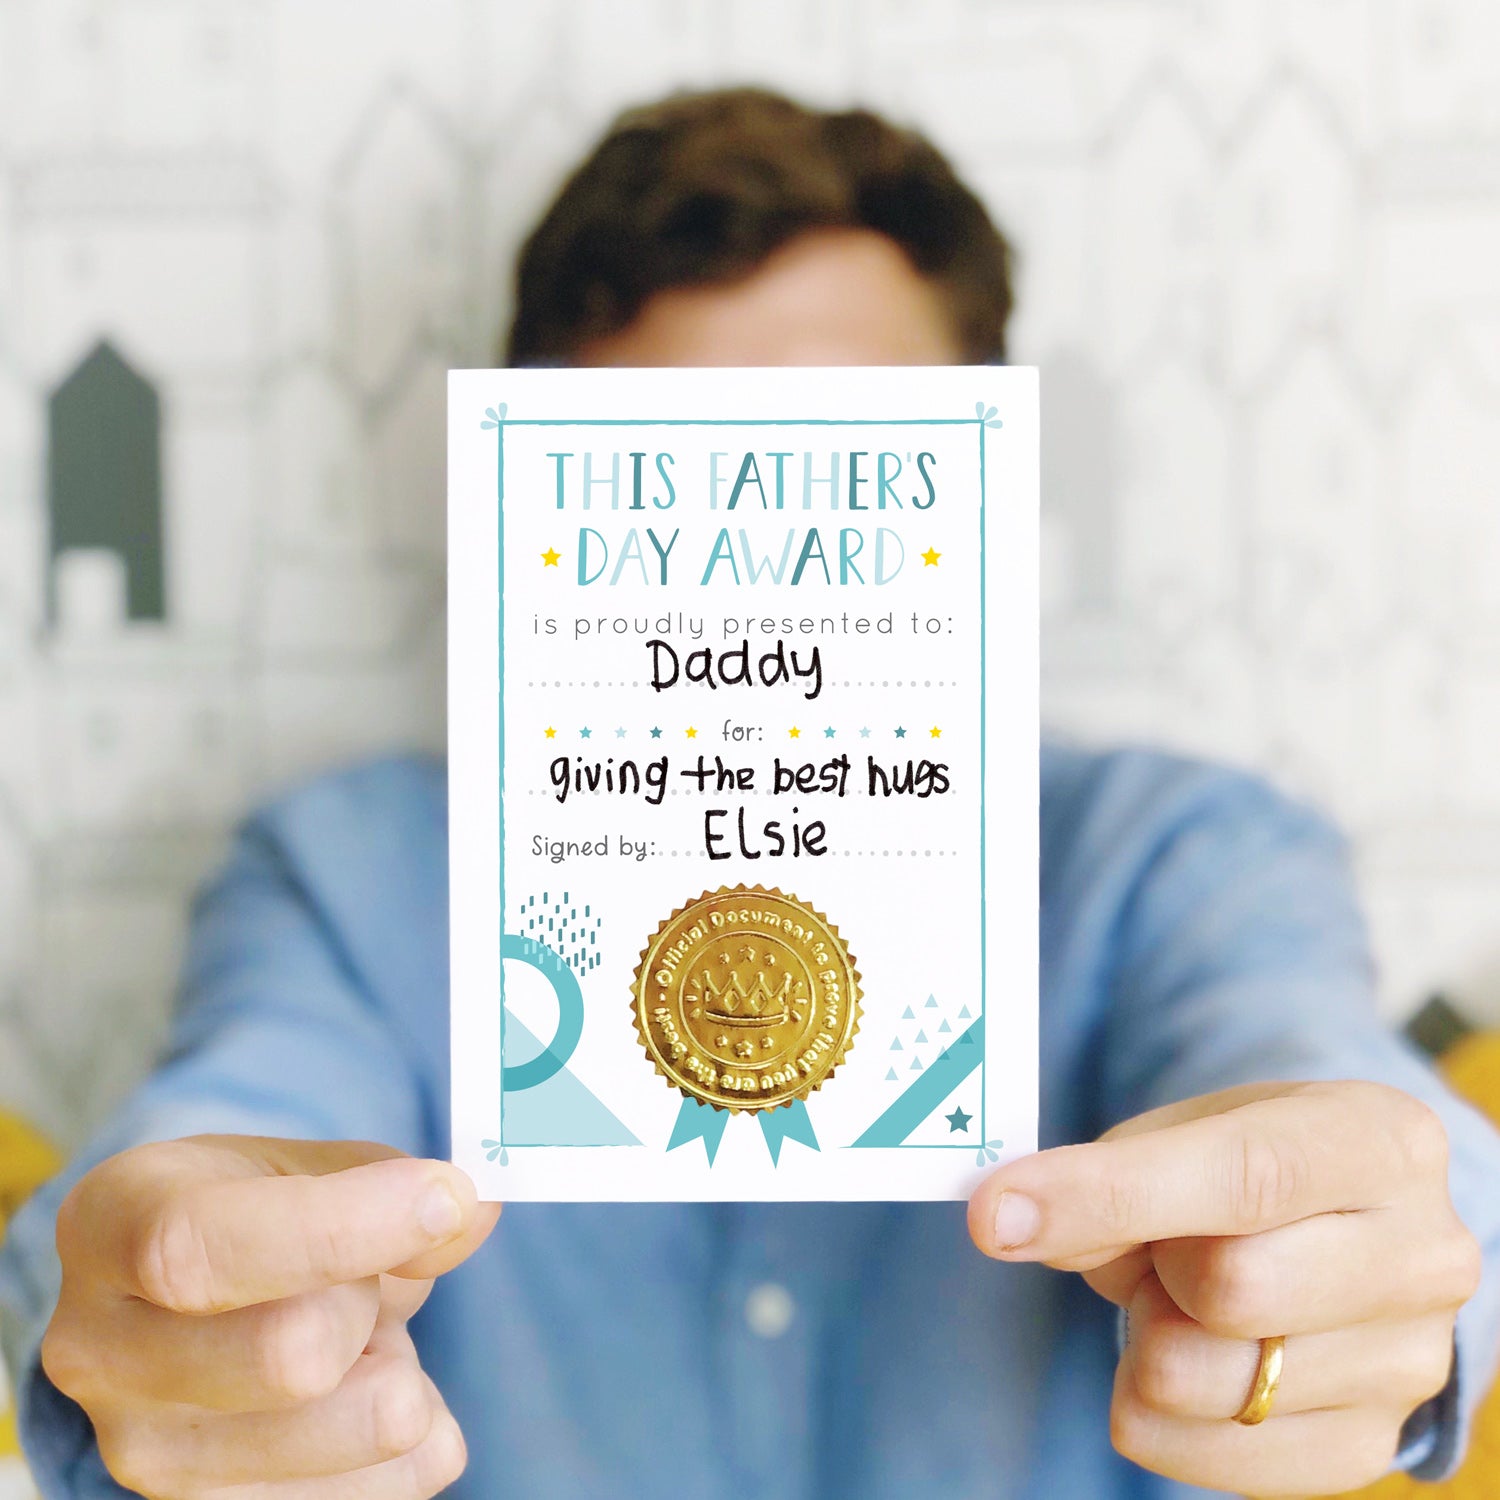 A Father's day award card being held towards the camera by a male in a blue shirt. The card has been personalised by a childs handwriting and features a gold shiny certificate seal.